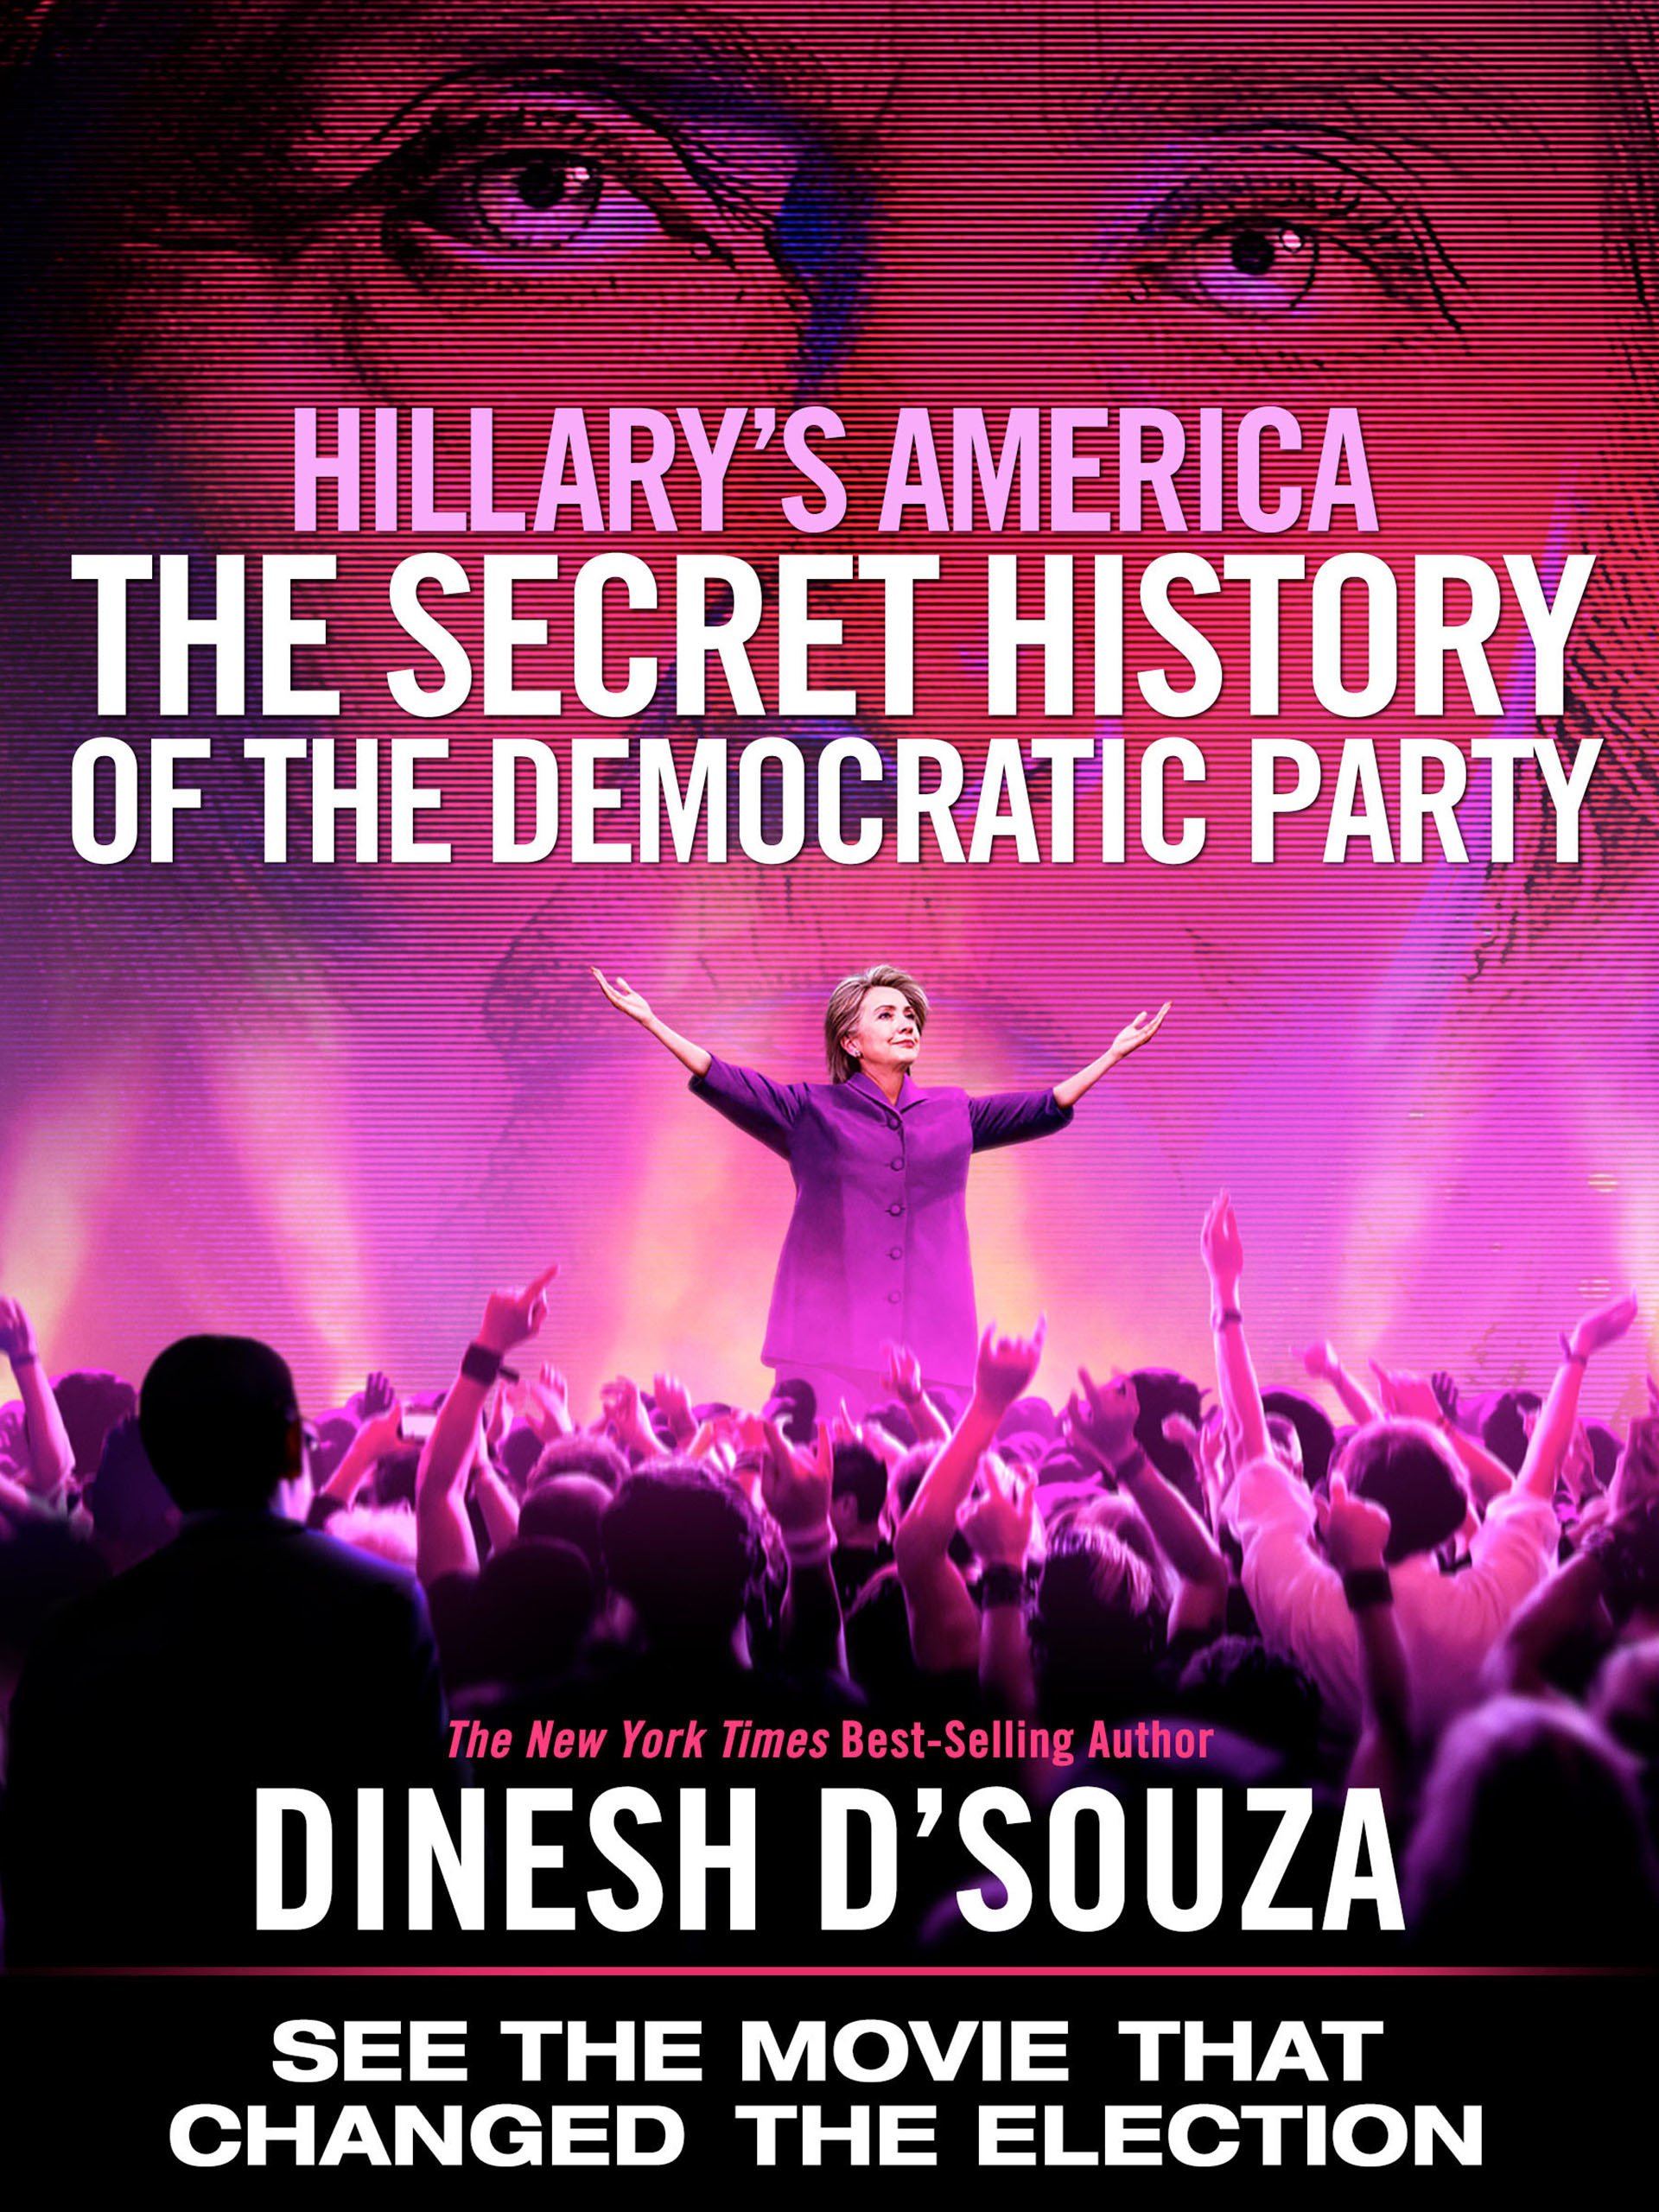 Hillary's America: The Secret History Of The Democratic Party Main Poster